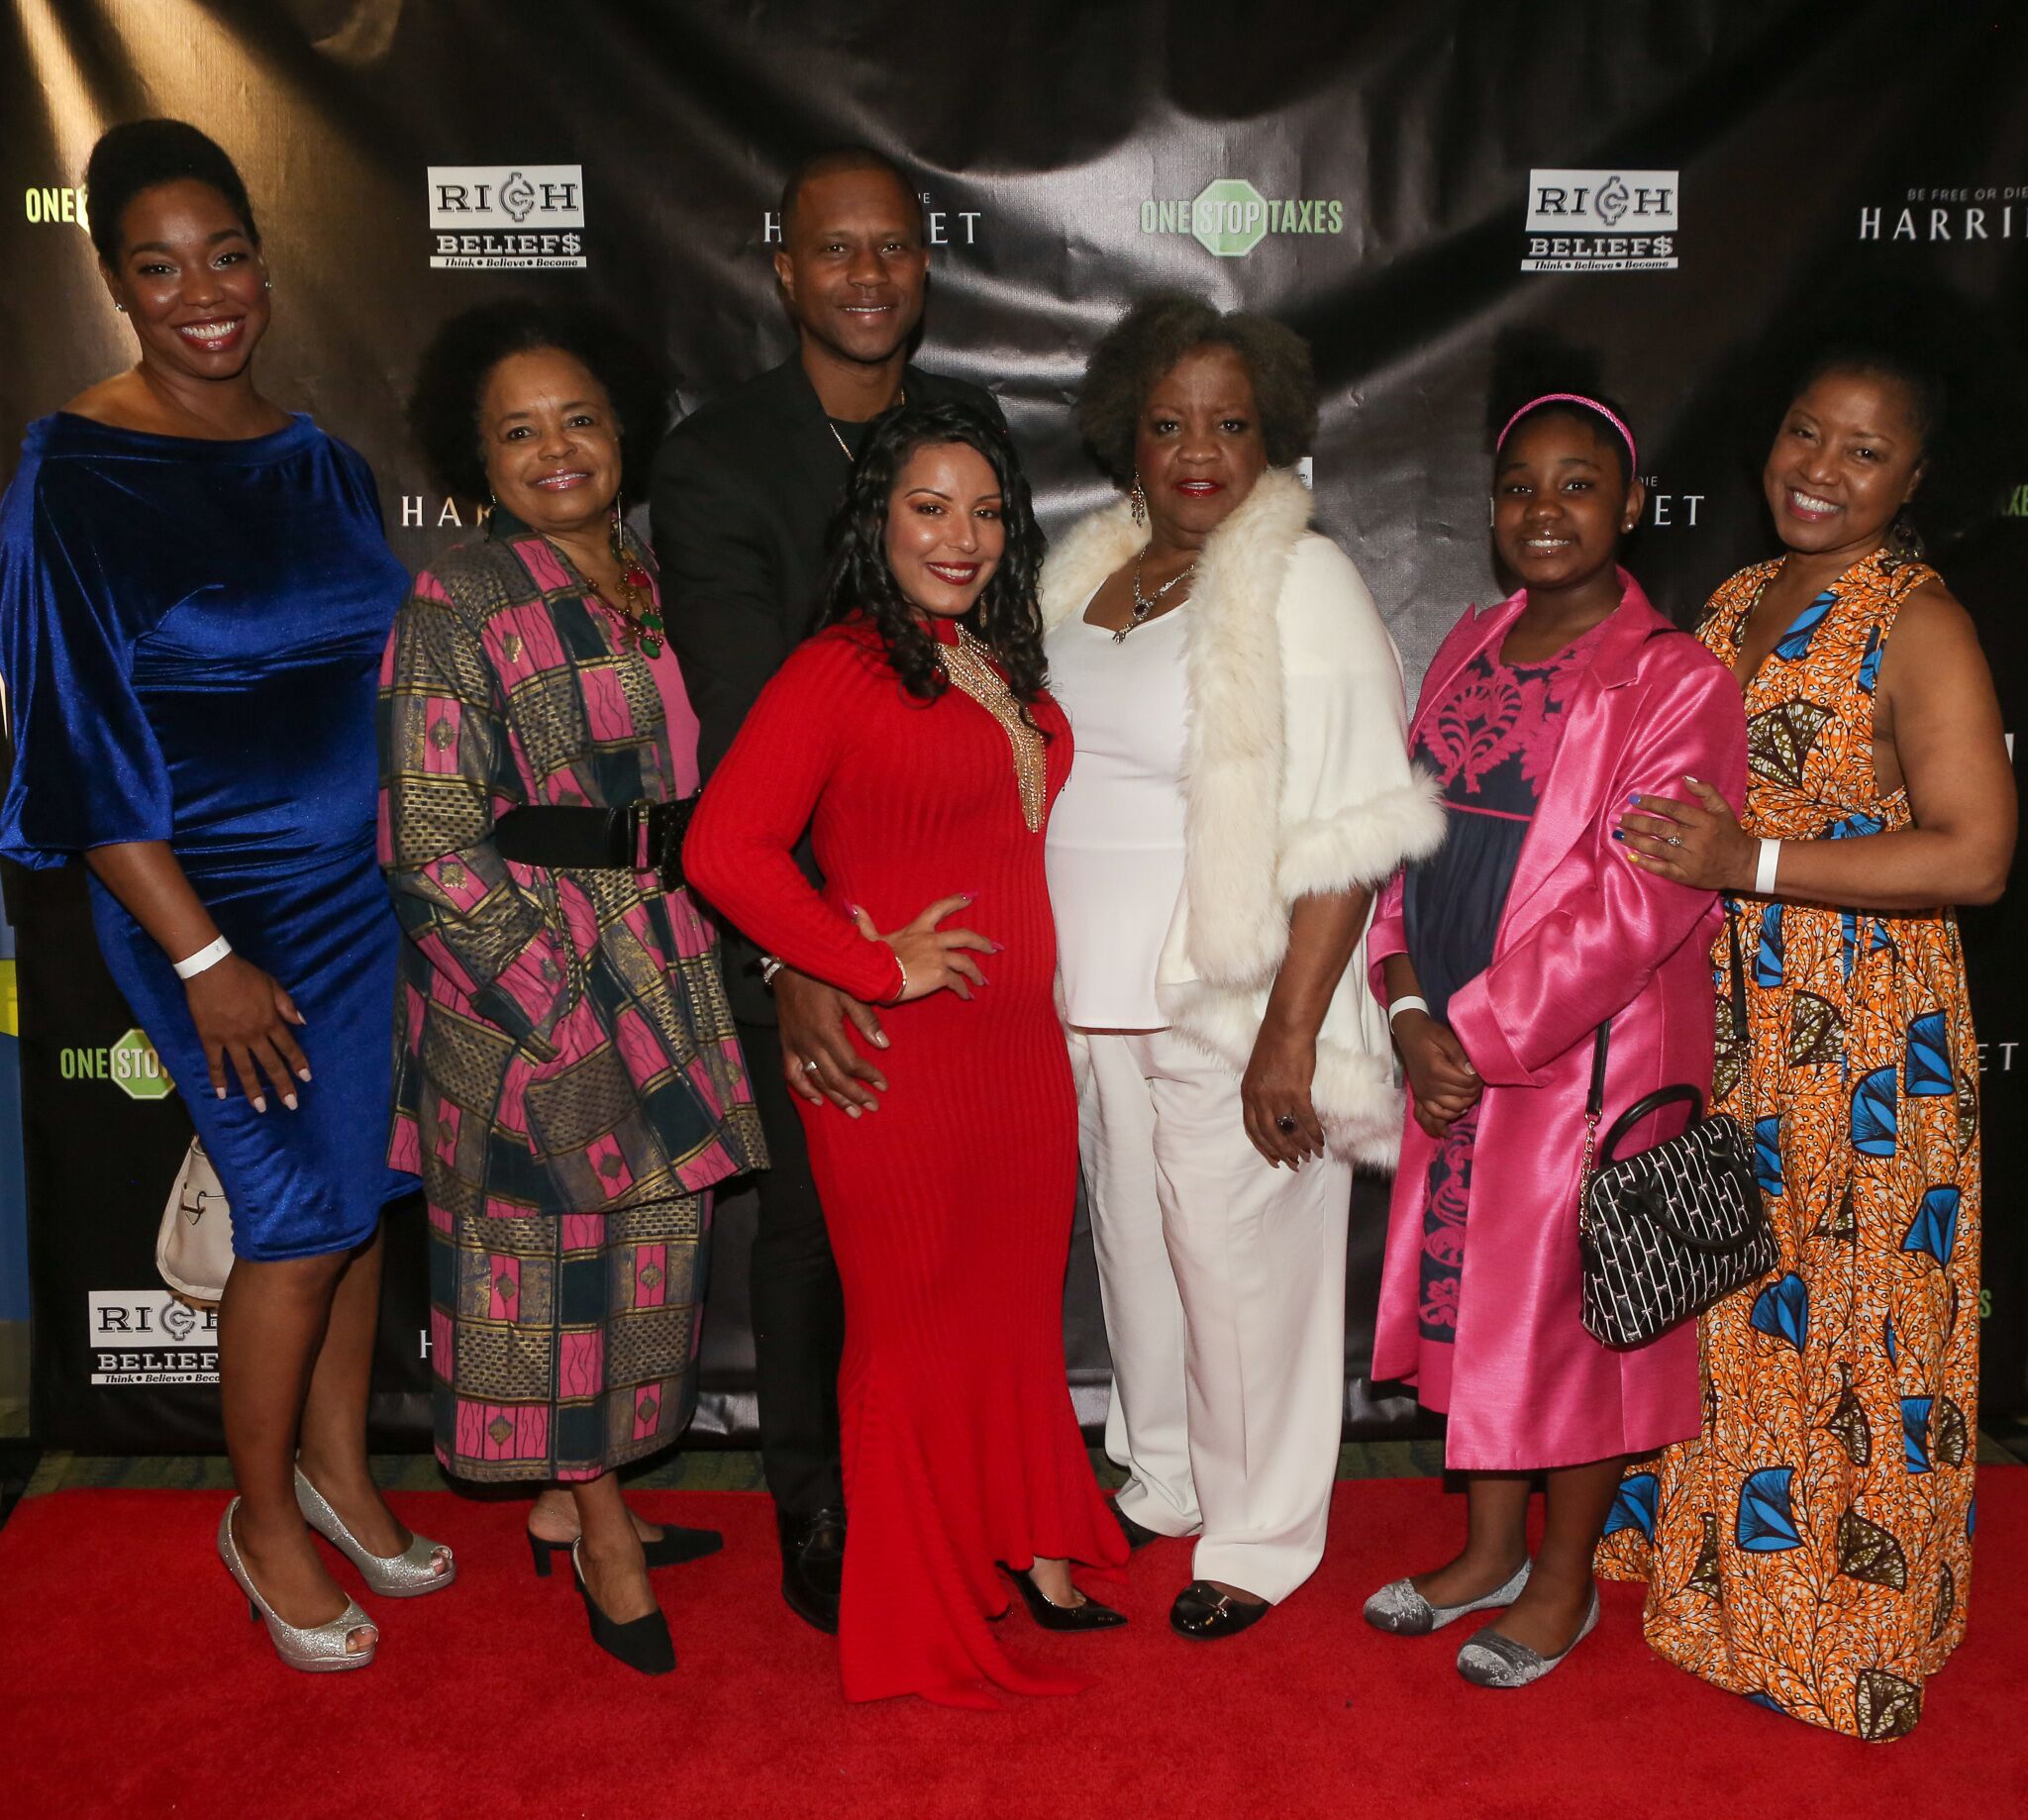 Bill Duke, Les Brown, Elizabeth Omilami and more attend ONE STOP Taxes Exclusive Red Carpet Premiere of “Harriet”